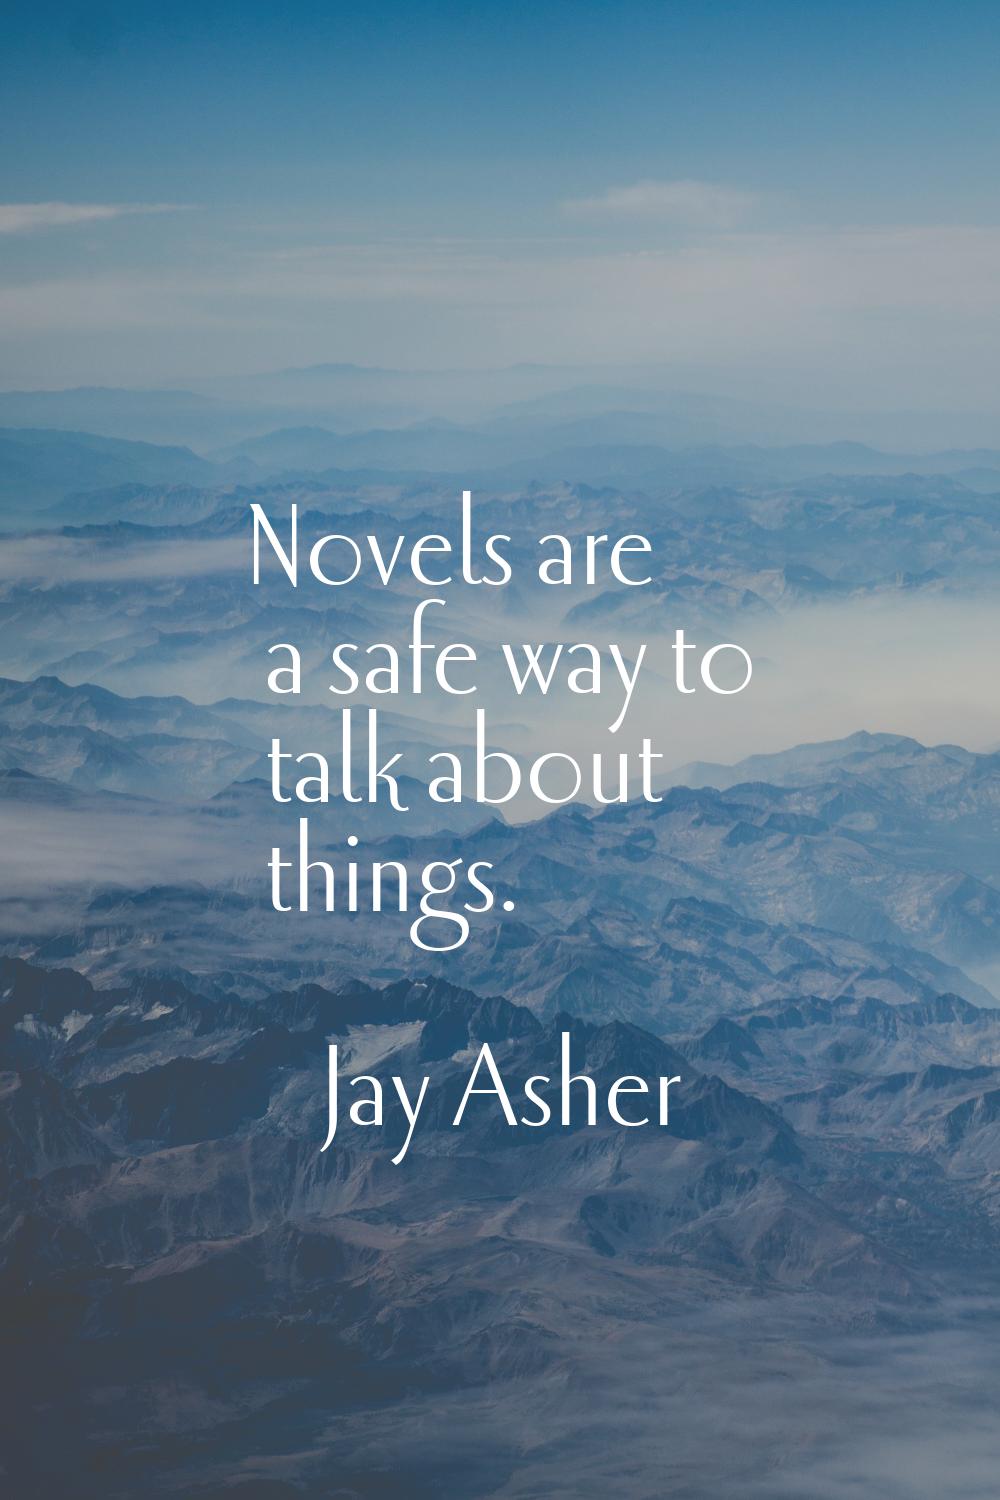 Novels are a safe way to talk about things.